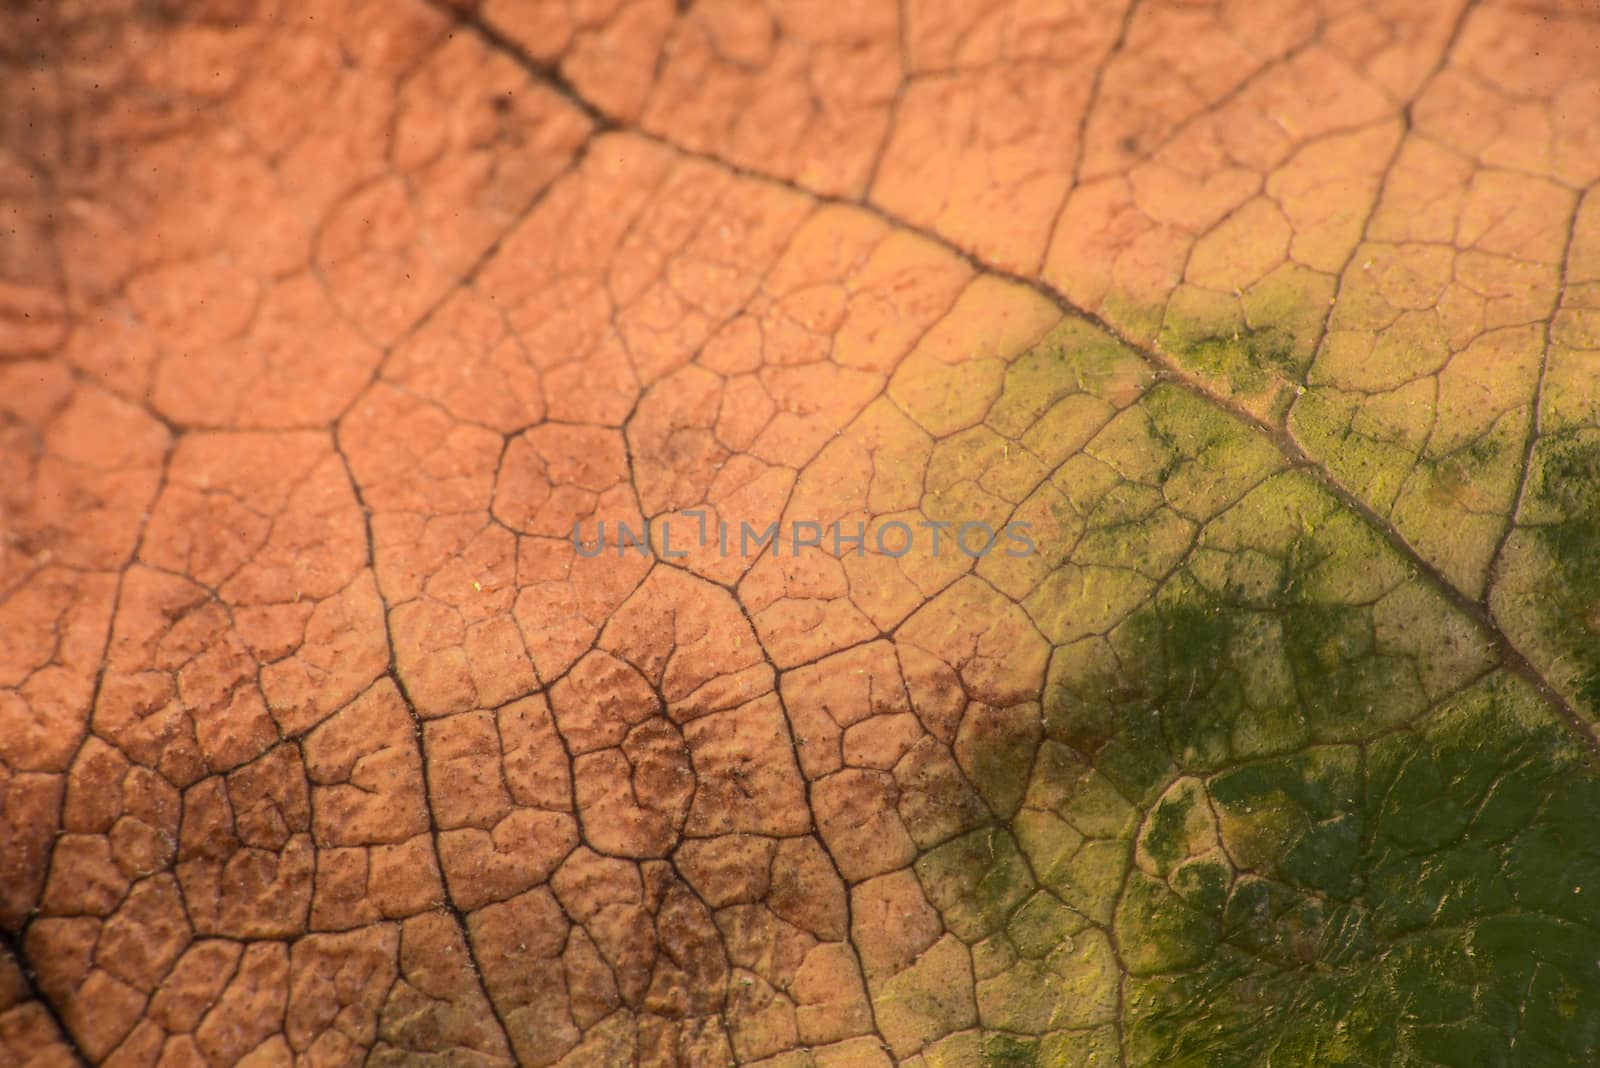 Macro photograph of the texture of a leaf in autumn by vicenfoto